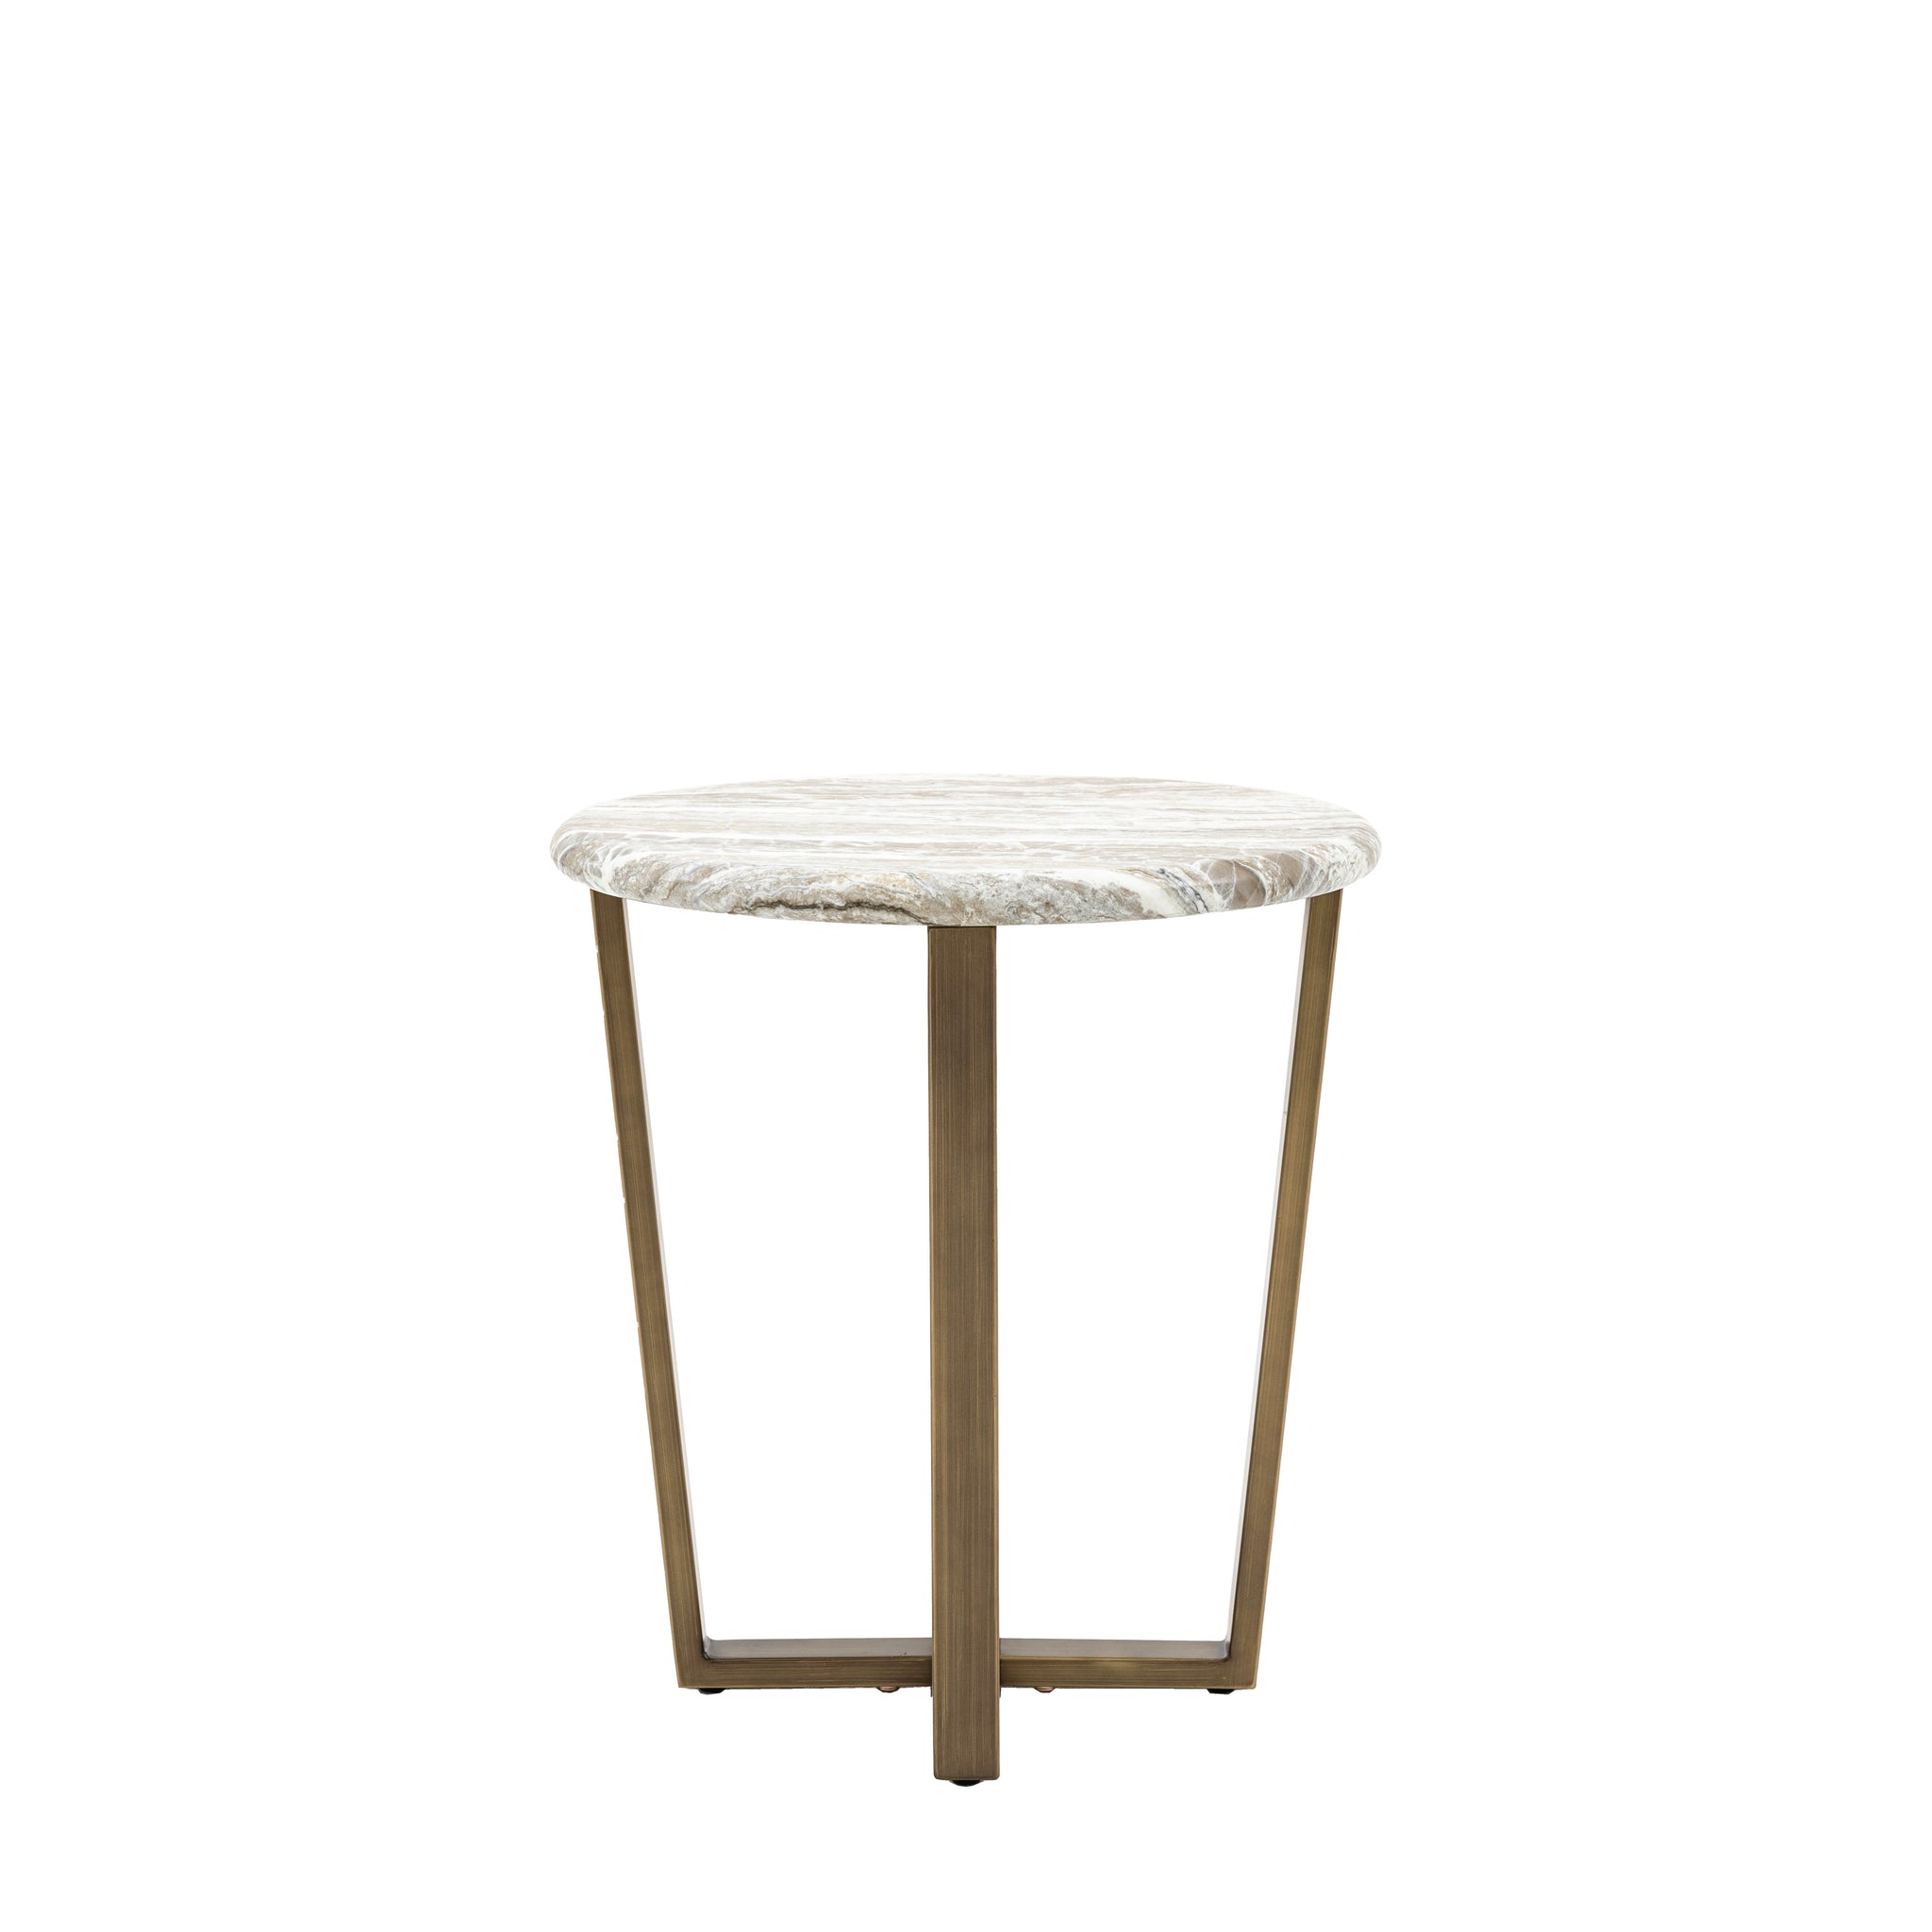 Luzo Side Table